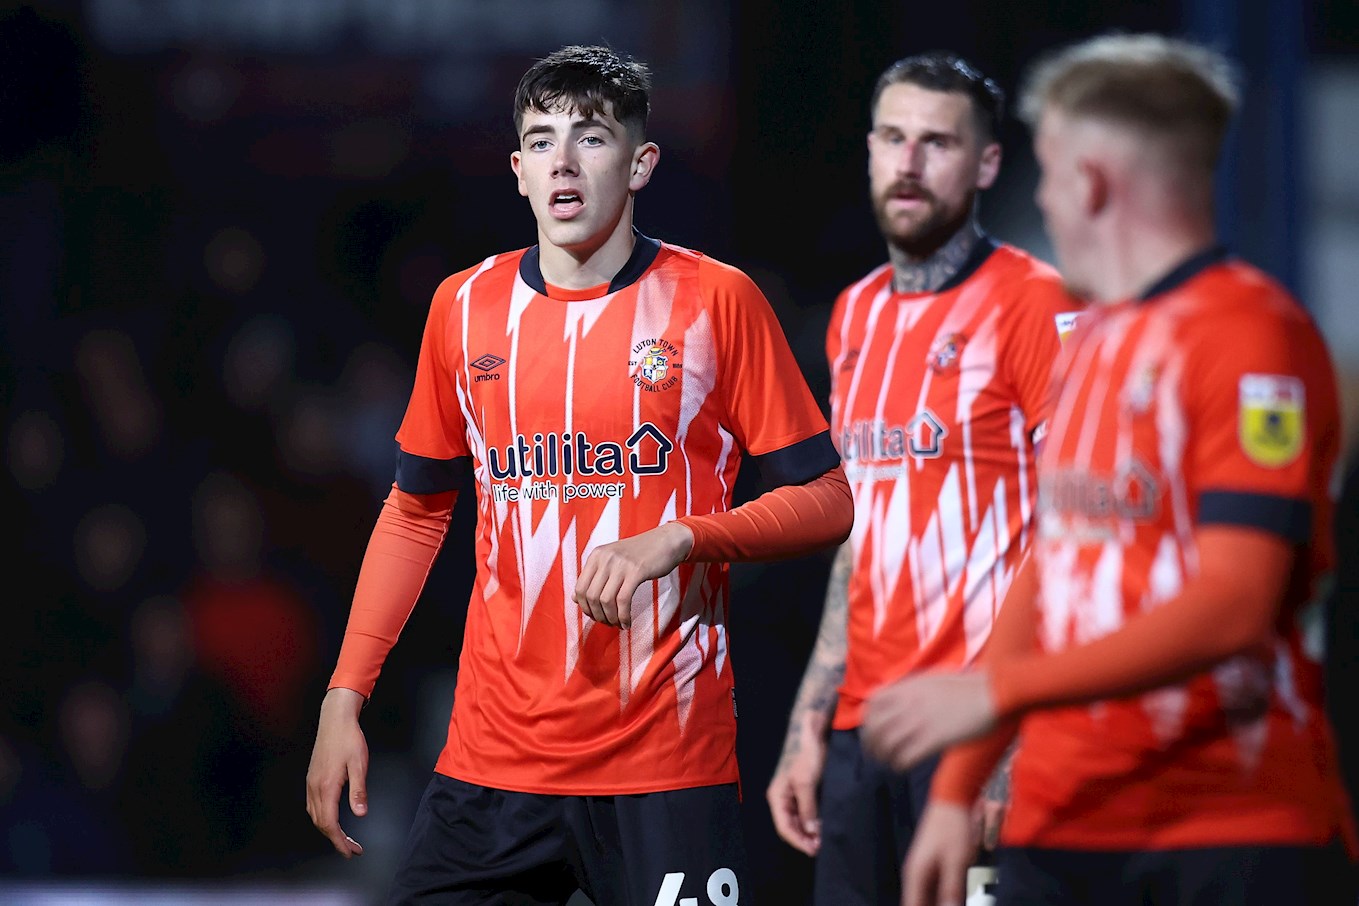 Joe Johnson came on to make his Luton Town debut aged 17 years and 62 days